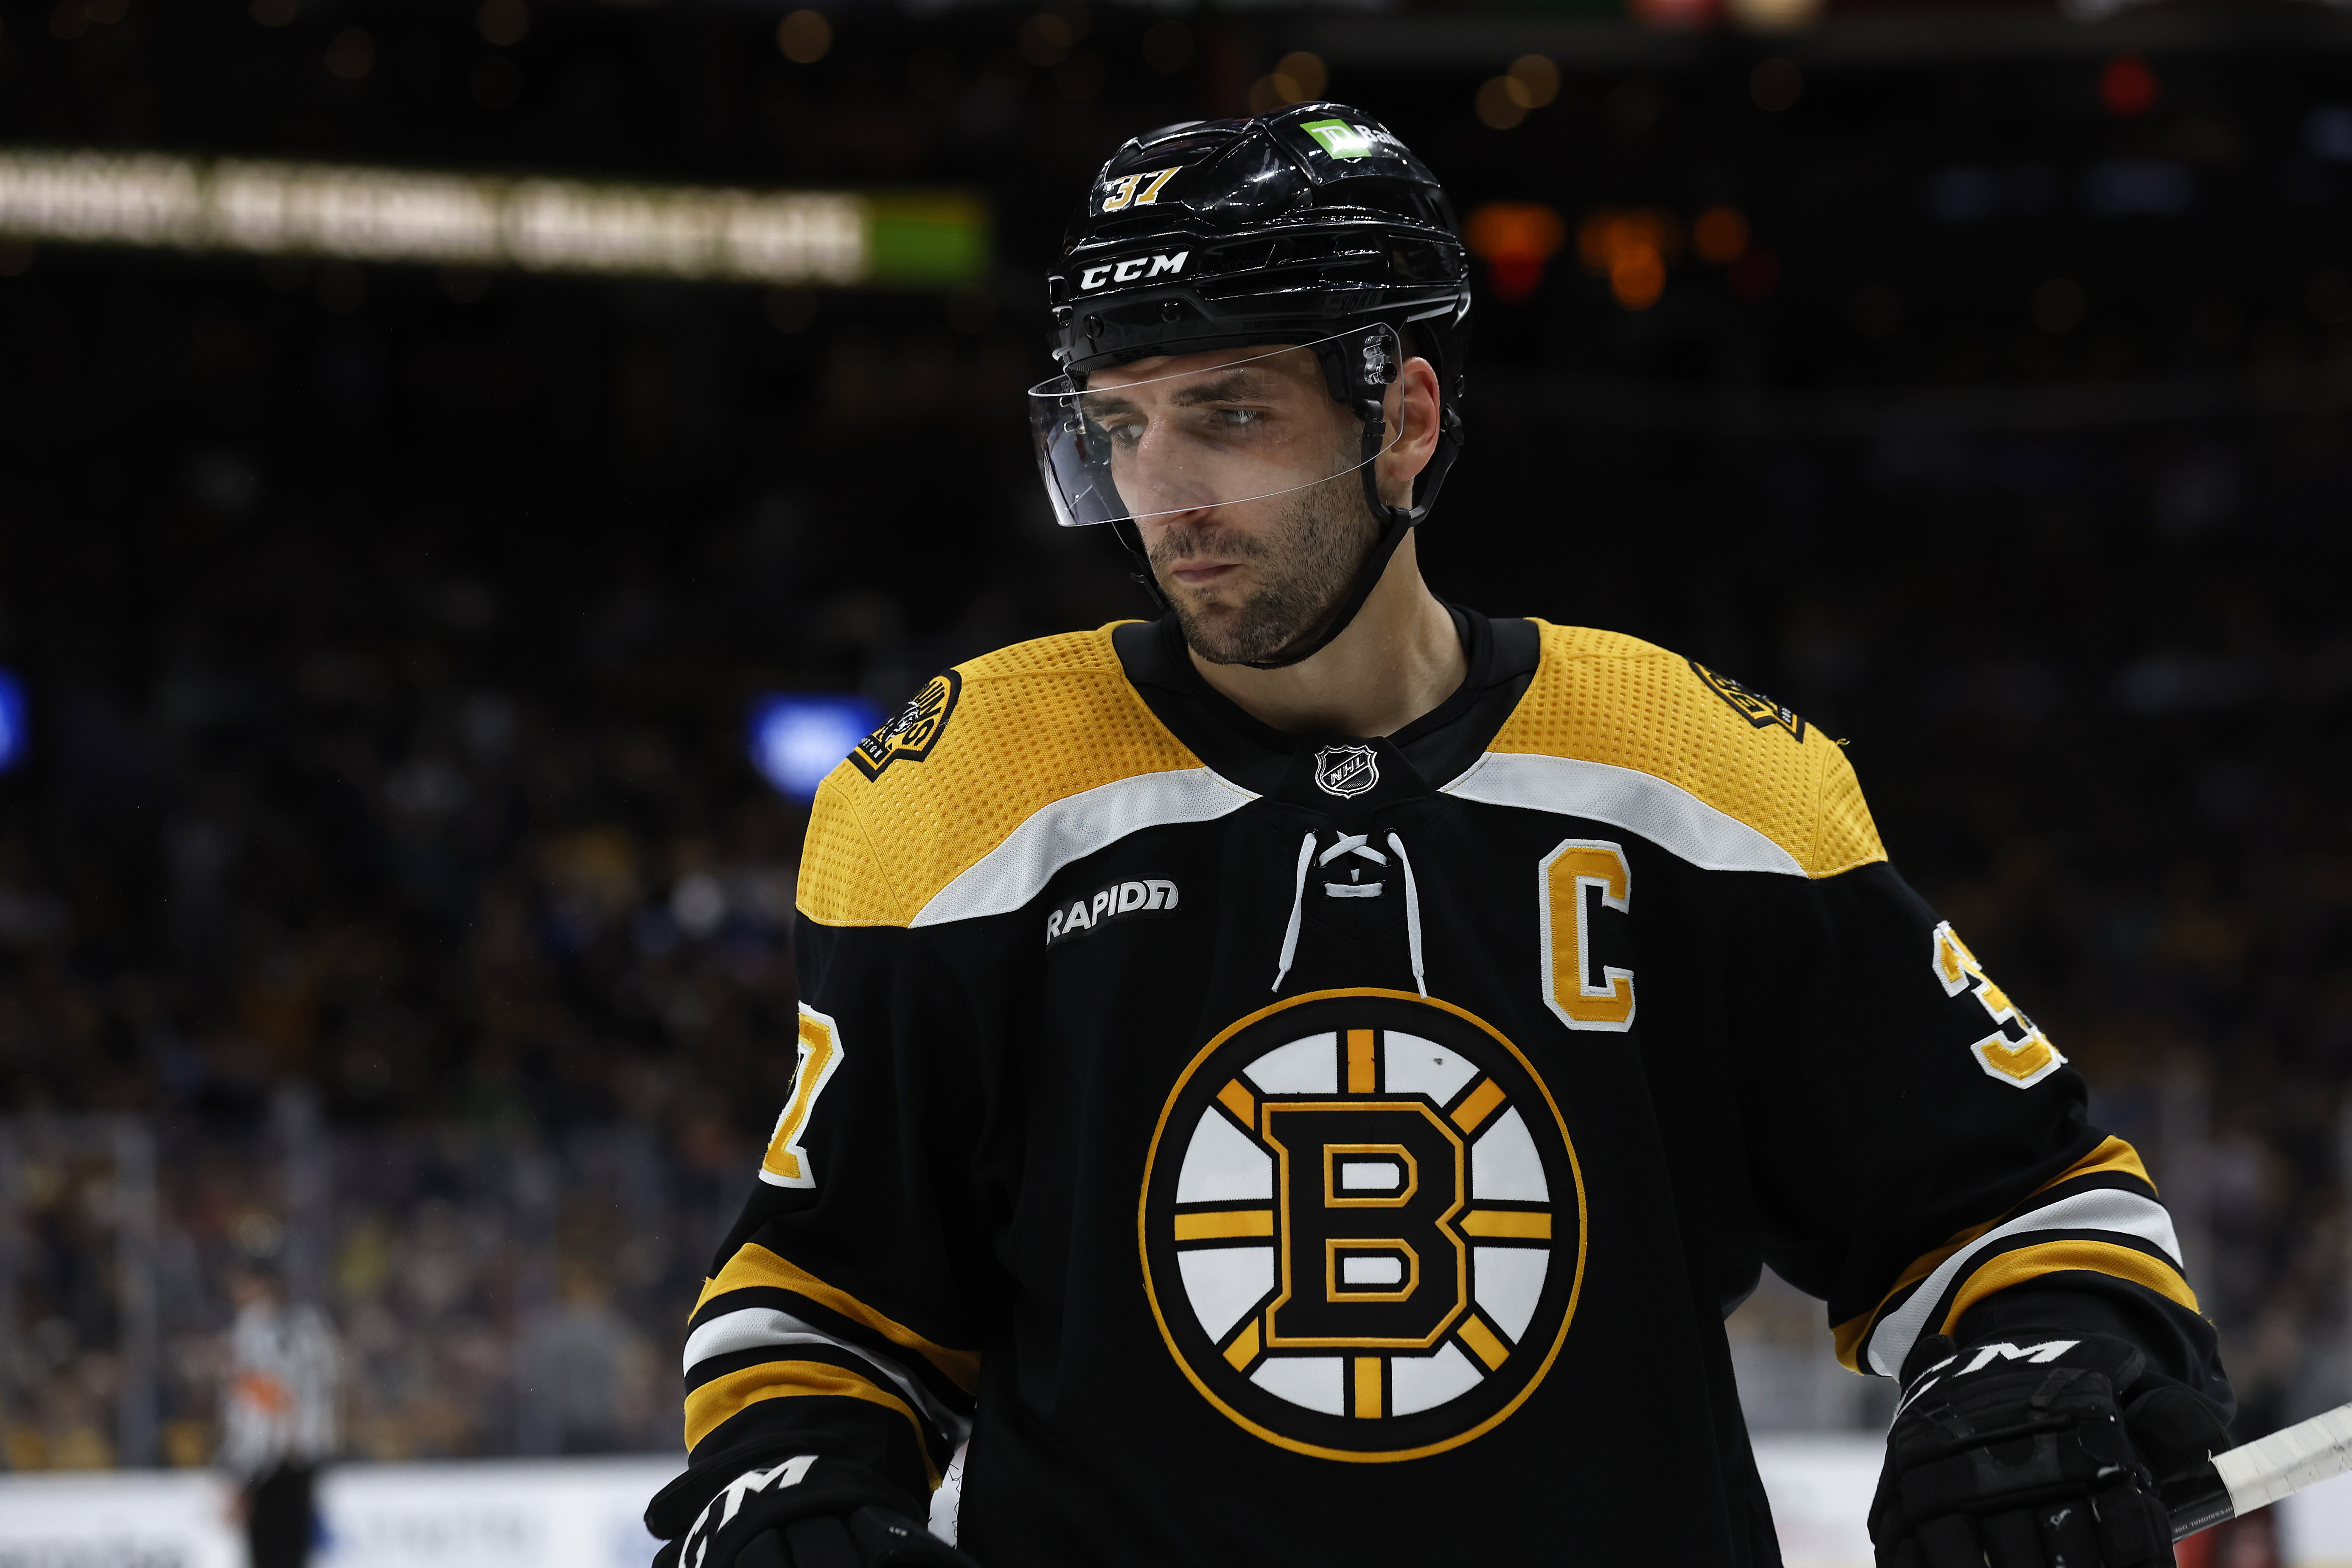 Patrice Bergeron family: All you need to know about former Bruins